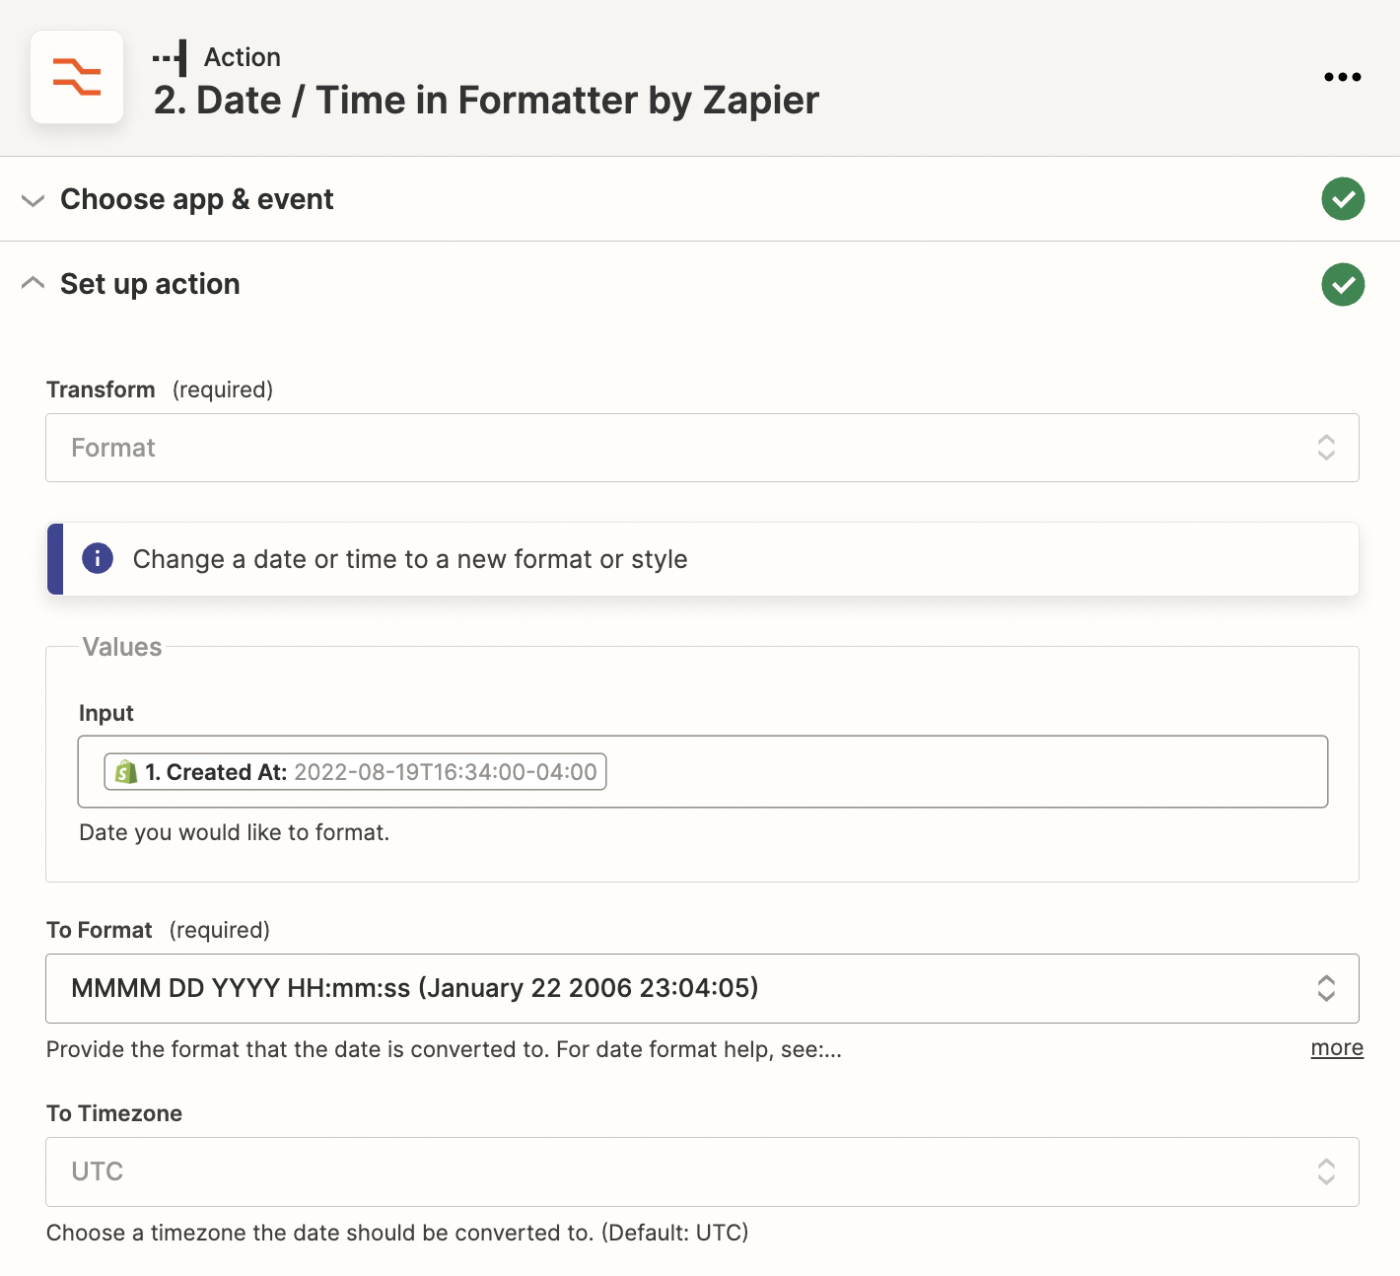 Zapier Formatter can convert PayPal text to the format you want before adding it to another app